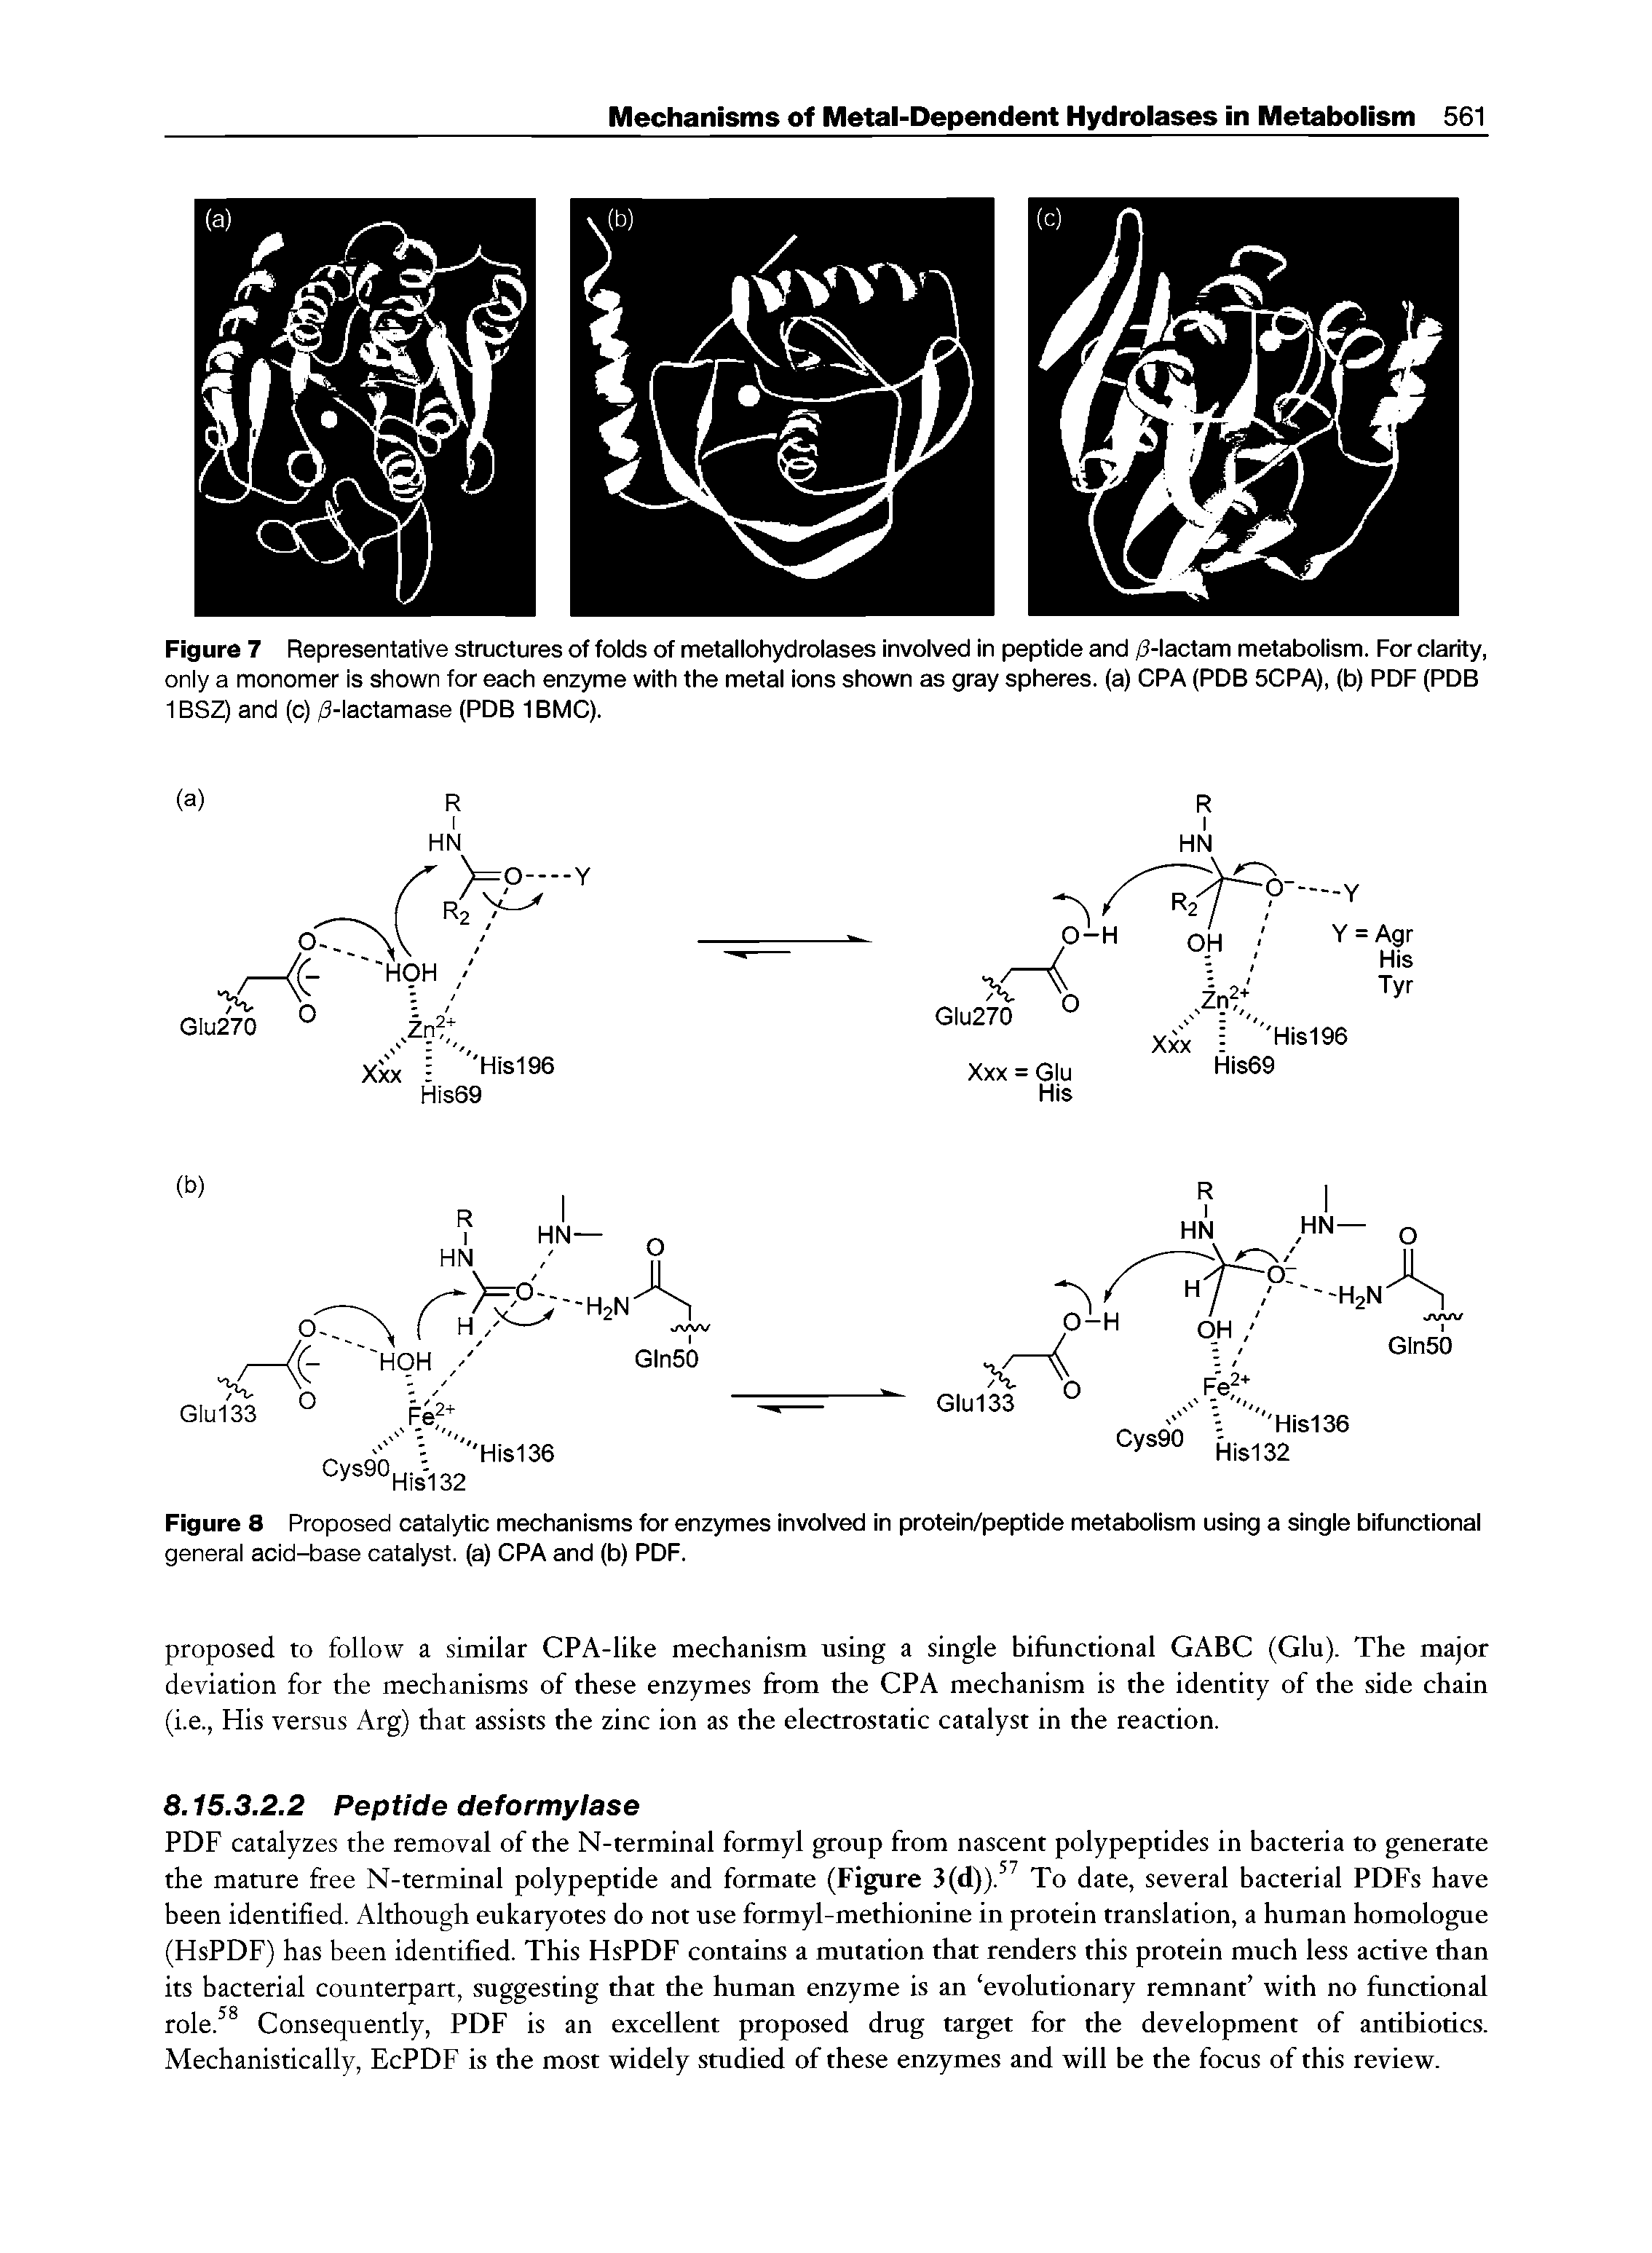 Figure 8 Proposed catalytic mechanisms for enzymes involved in protein/peptide metabolism using a single bifunctional general acid-base catalyst, (a) CPA and (b) PDF.